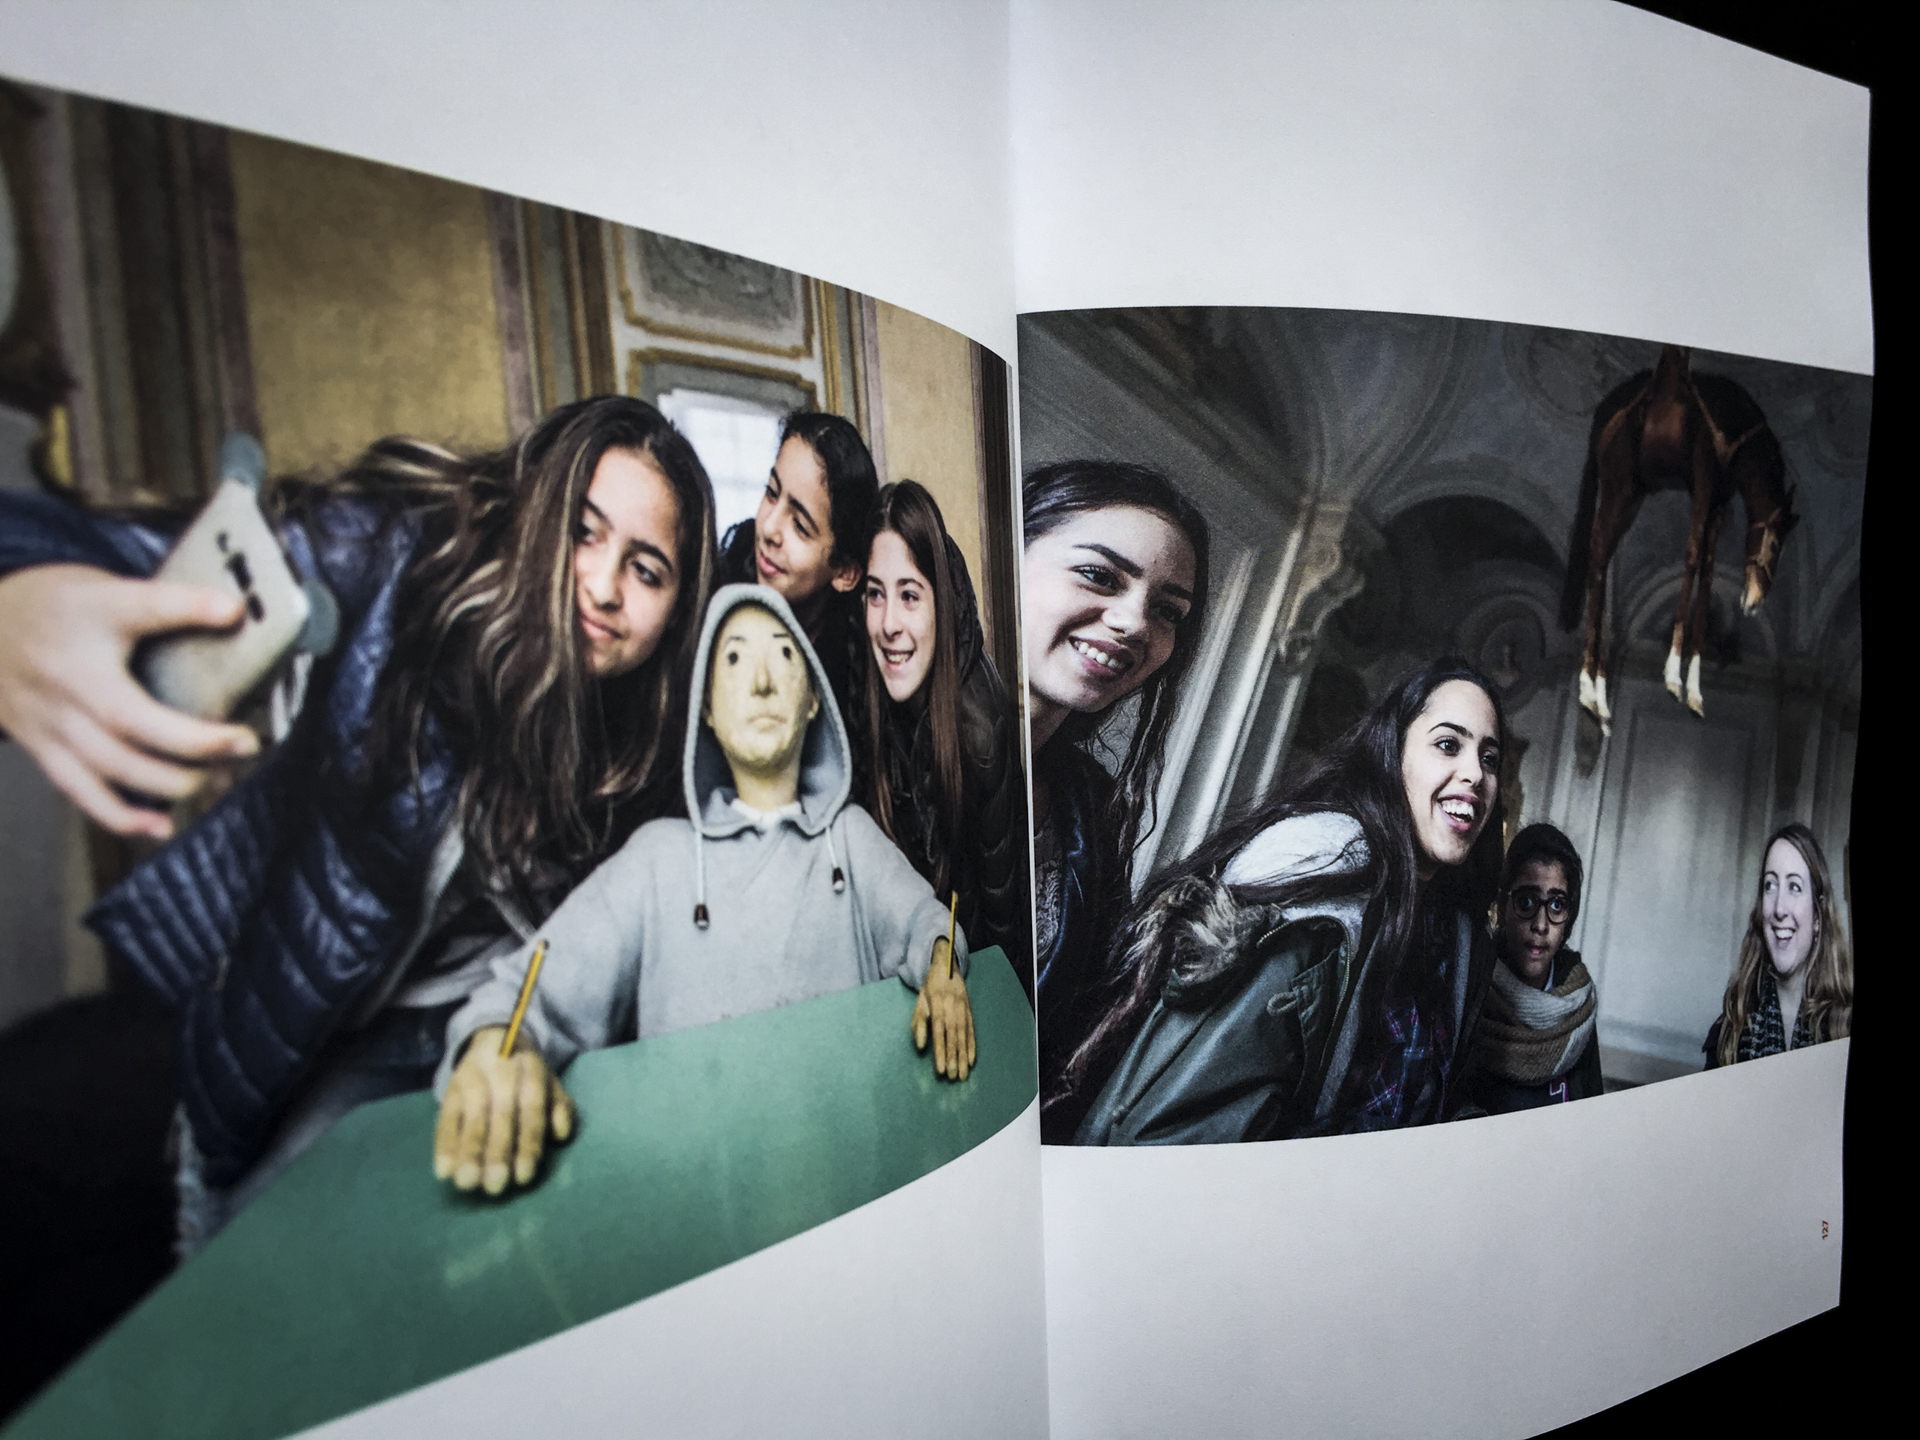 Arte alla Luce - book edited by MiBAC and Save the Children 2018